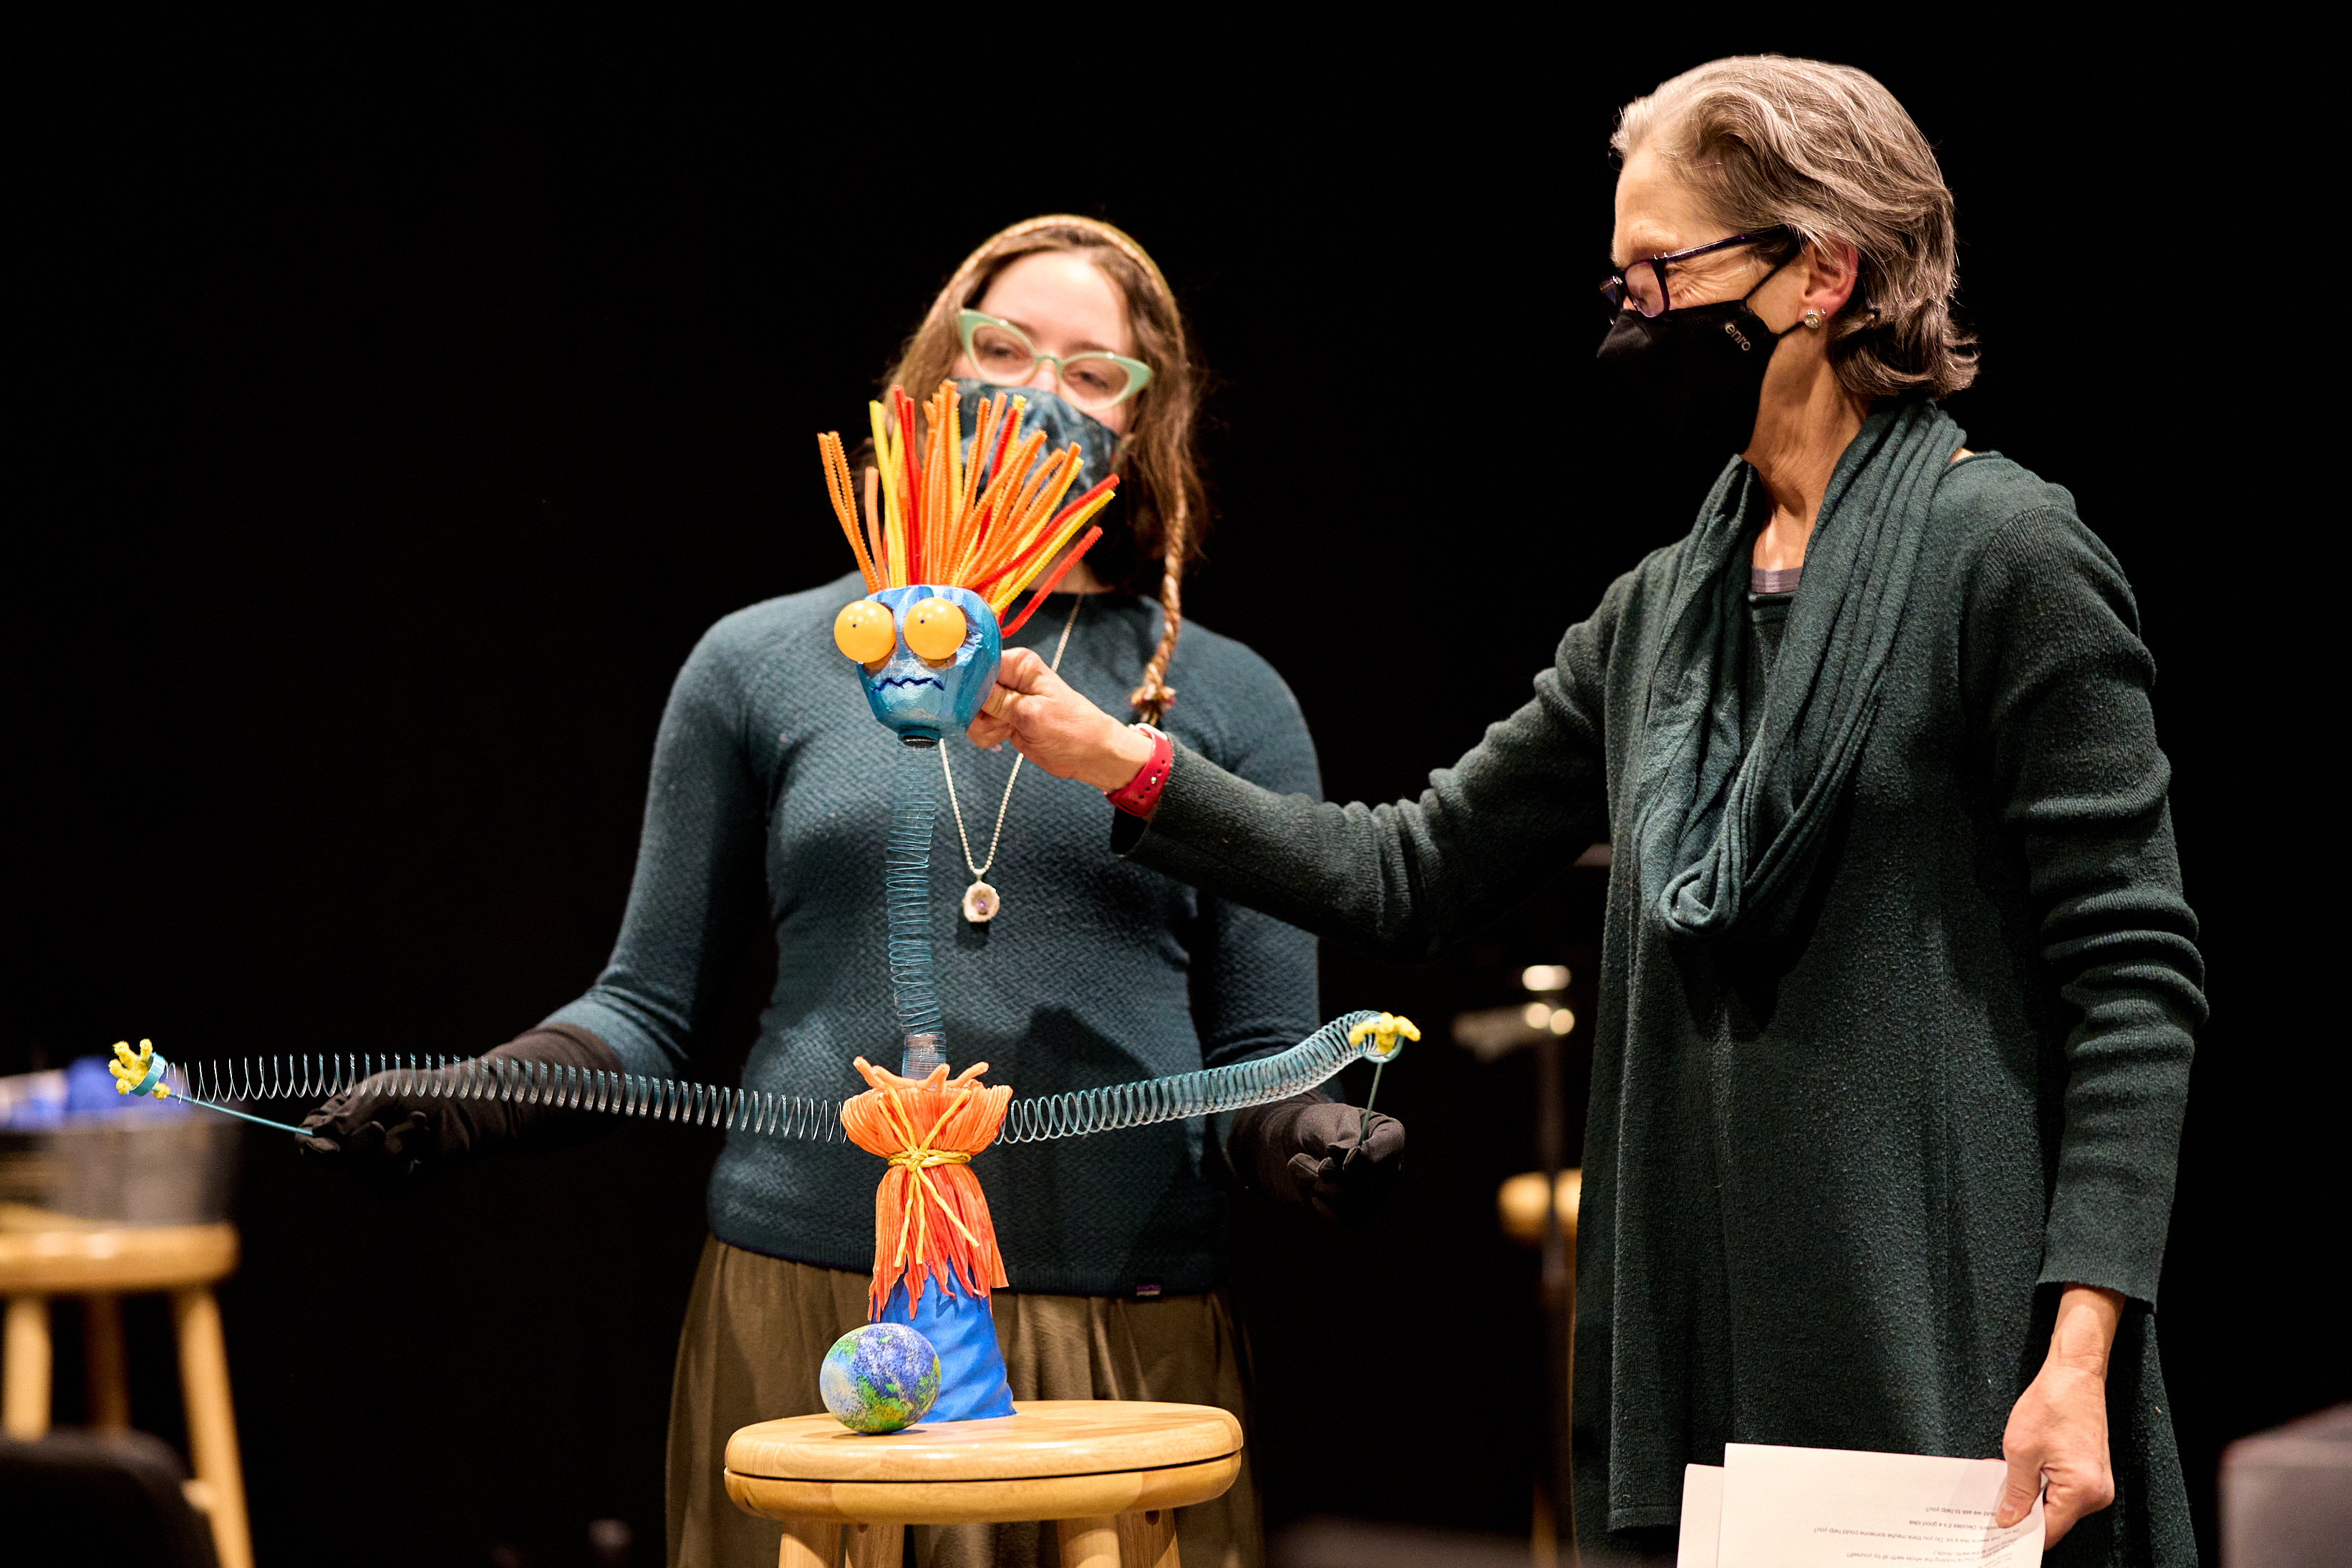 Puppeteers Jess Rassp and Ursula Marcum manipulate "Generalized Anxiety" puppet during Winter Seeds performance.